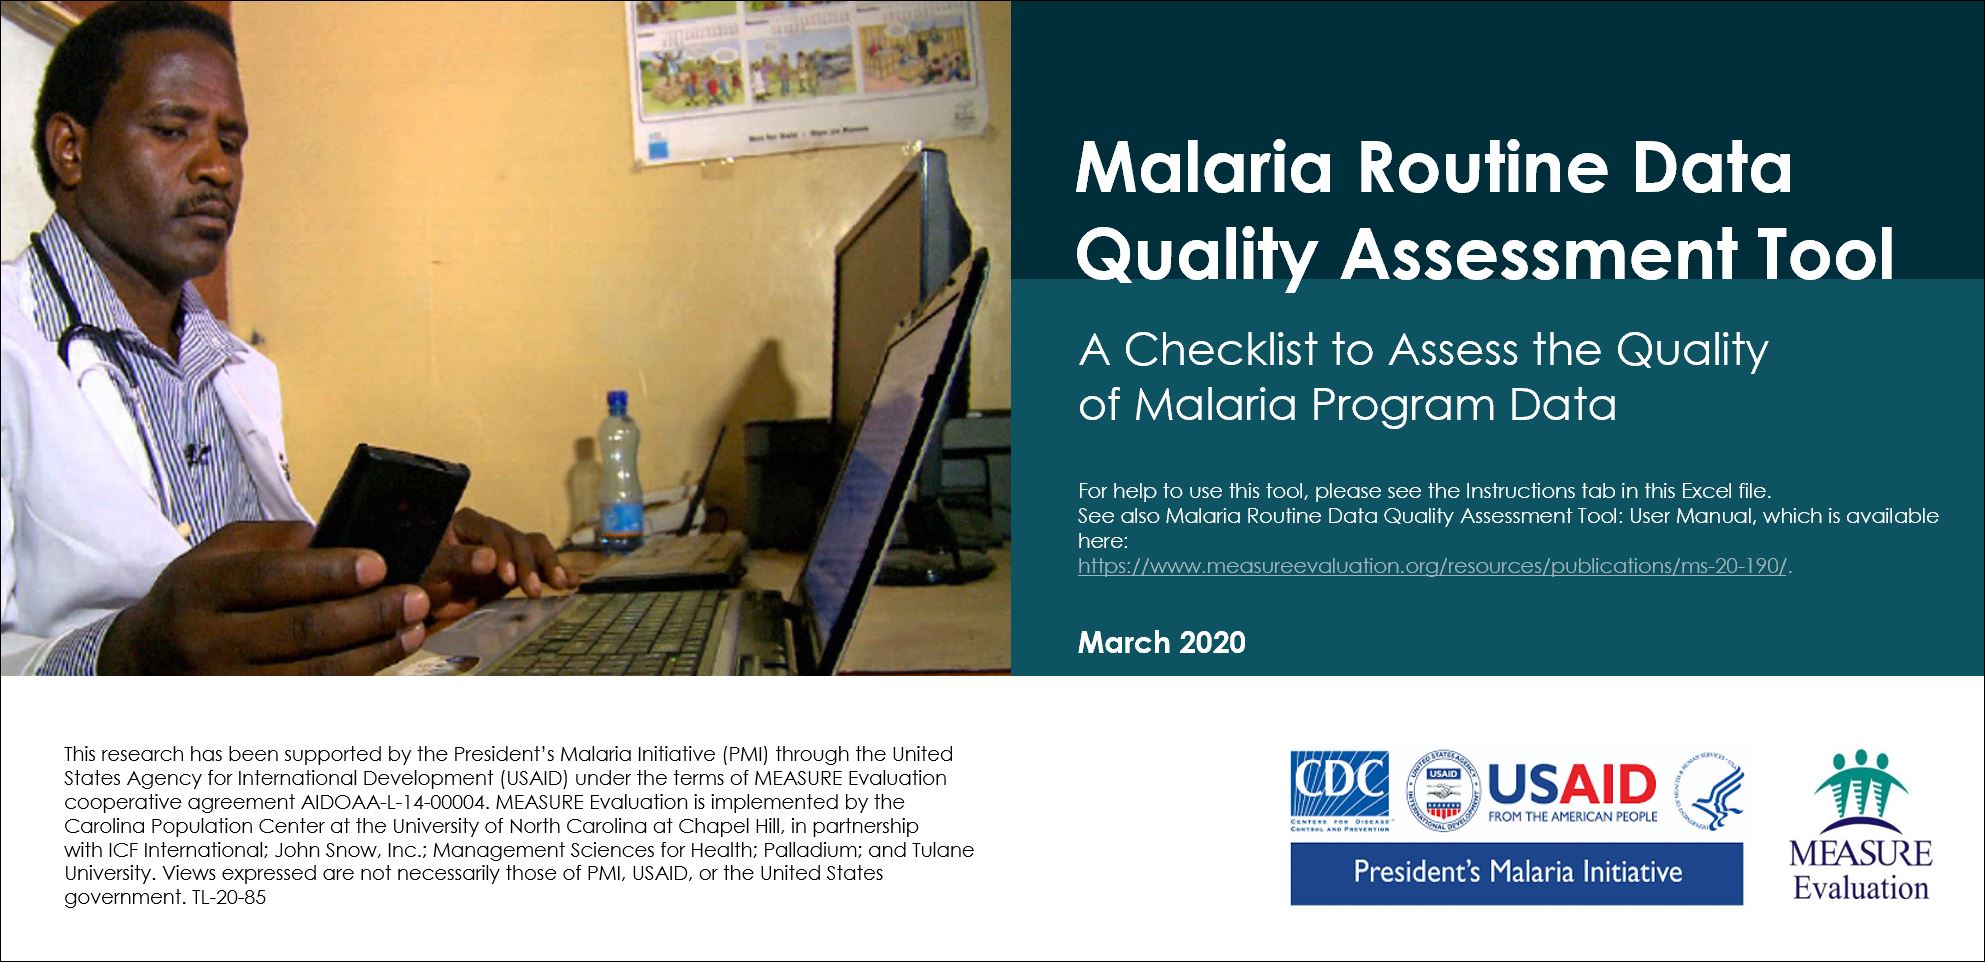 Malaria Routine Data Quality Assessment Tool: A Checklist to Assess the Quality of Malaria Program Data